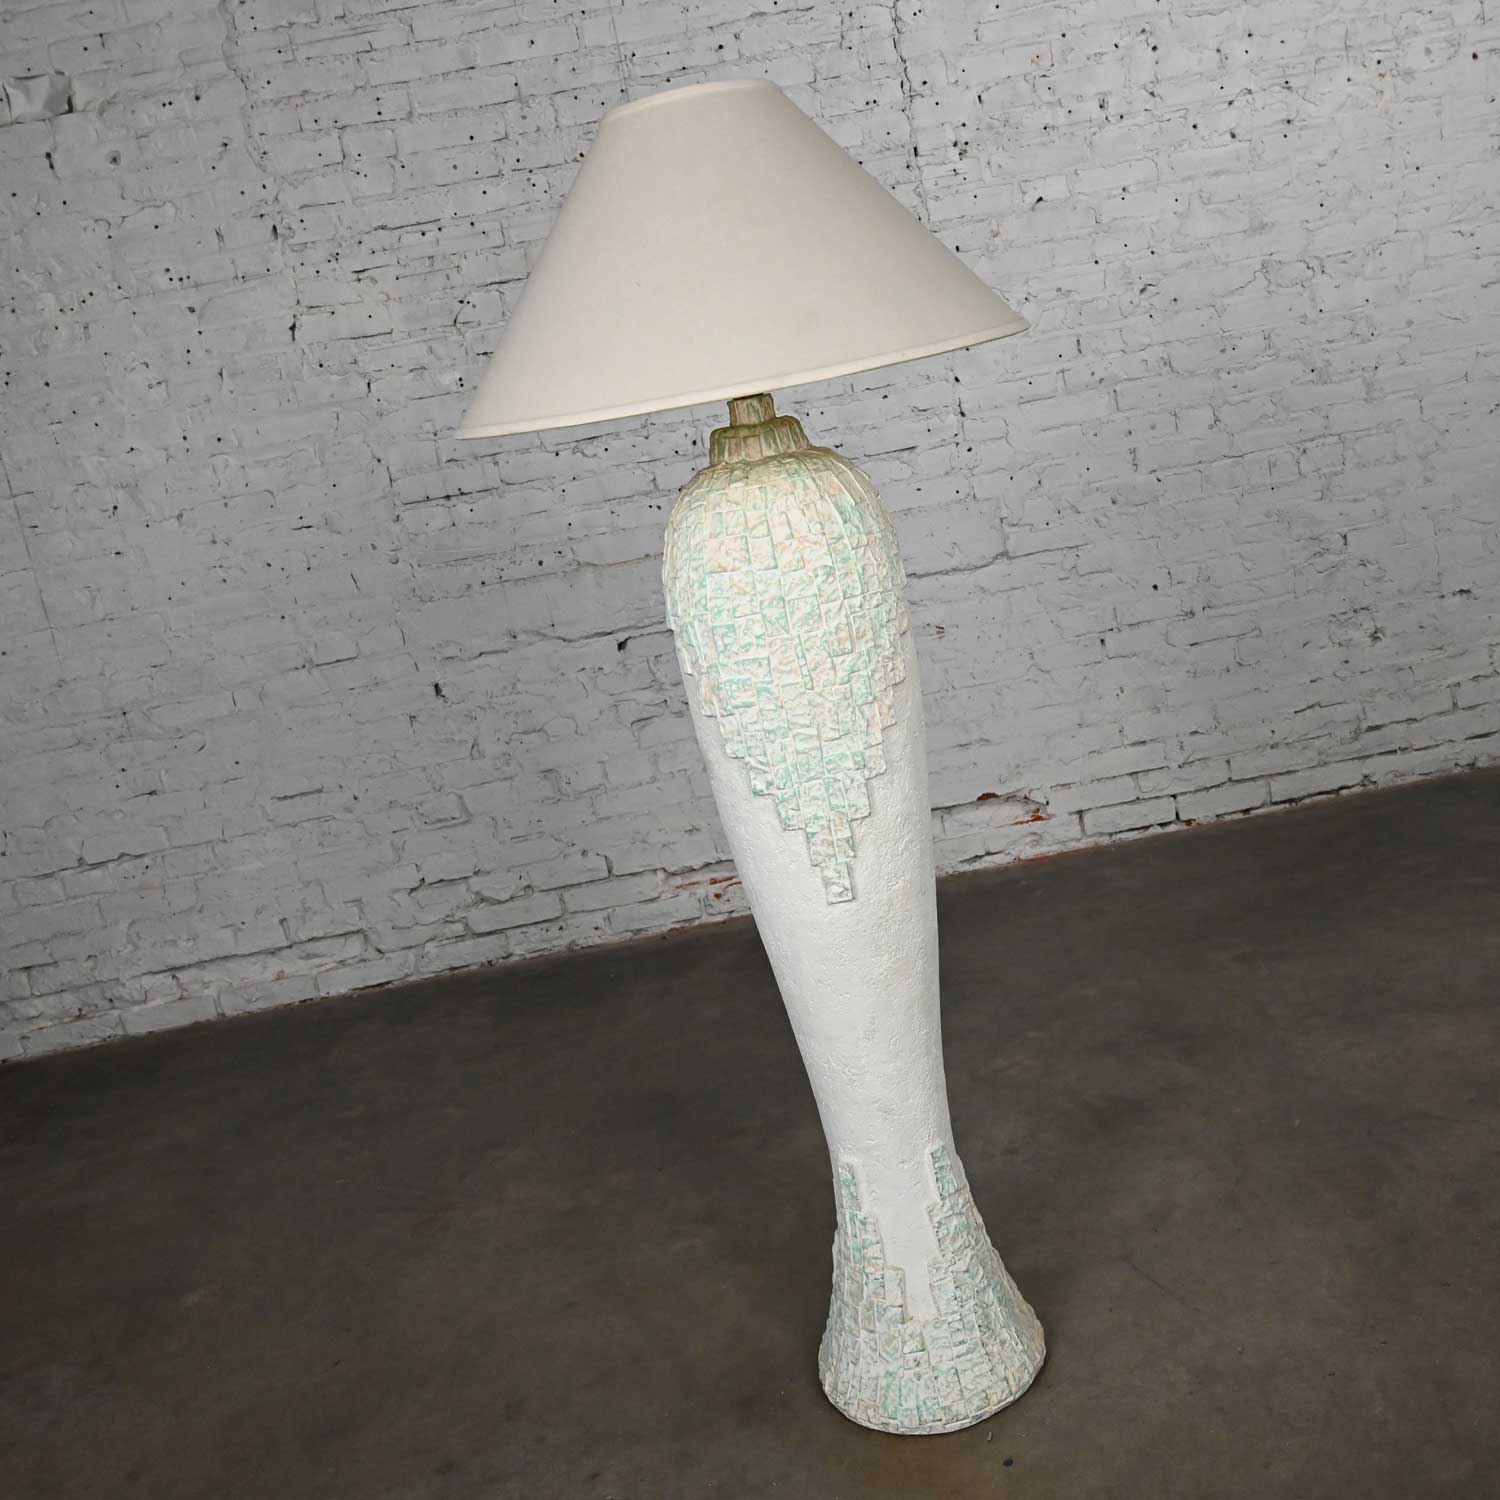 Late 20th Century Modern to Postmodern Southwest Style Textured Plaster Sculptural Floor Lamp